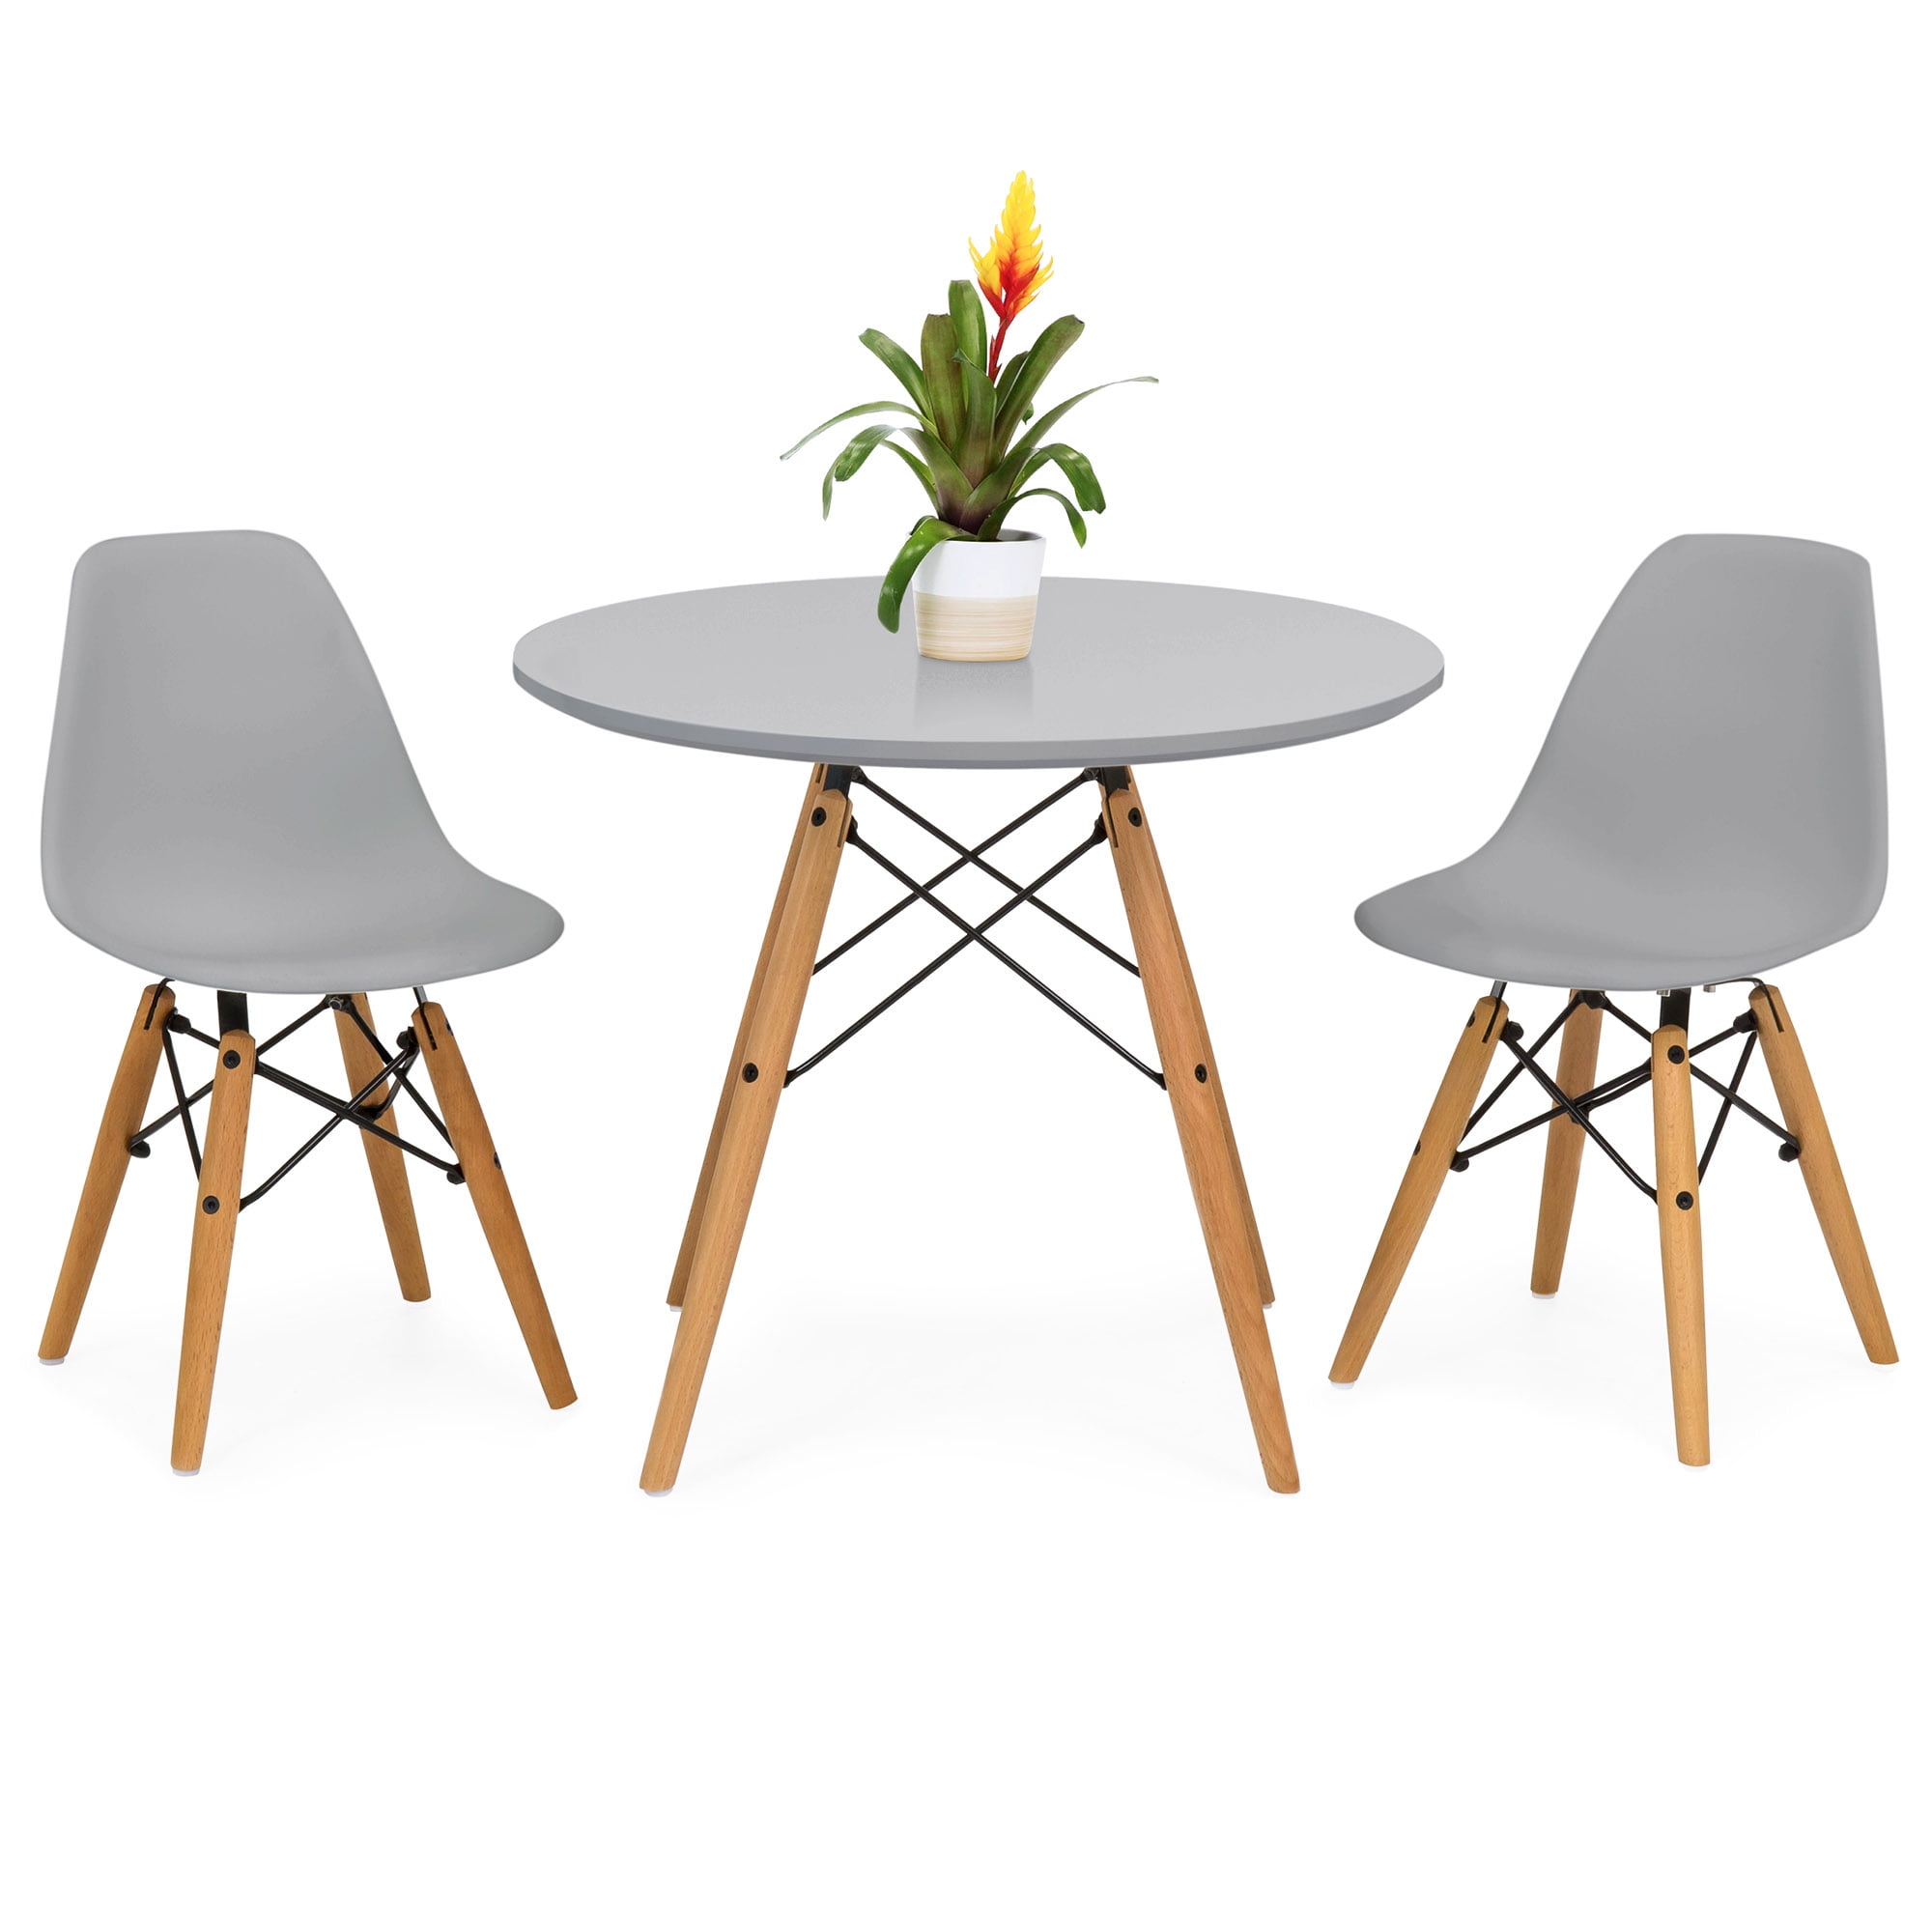 Best Choice Products Kids Mid-Century Modern Dining Room Round Table